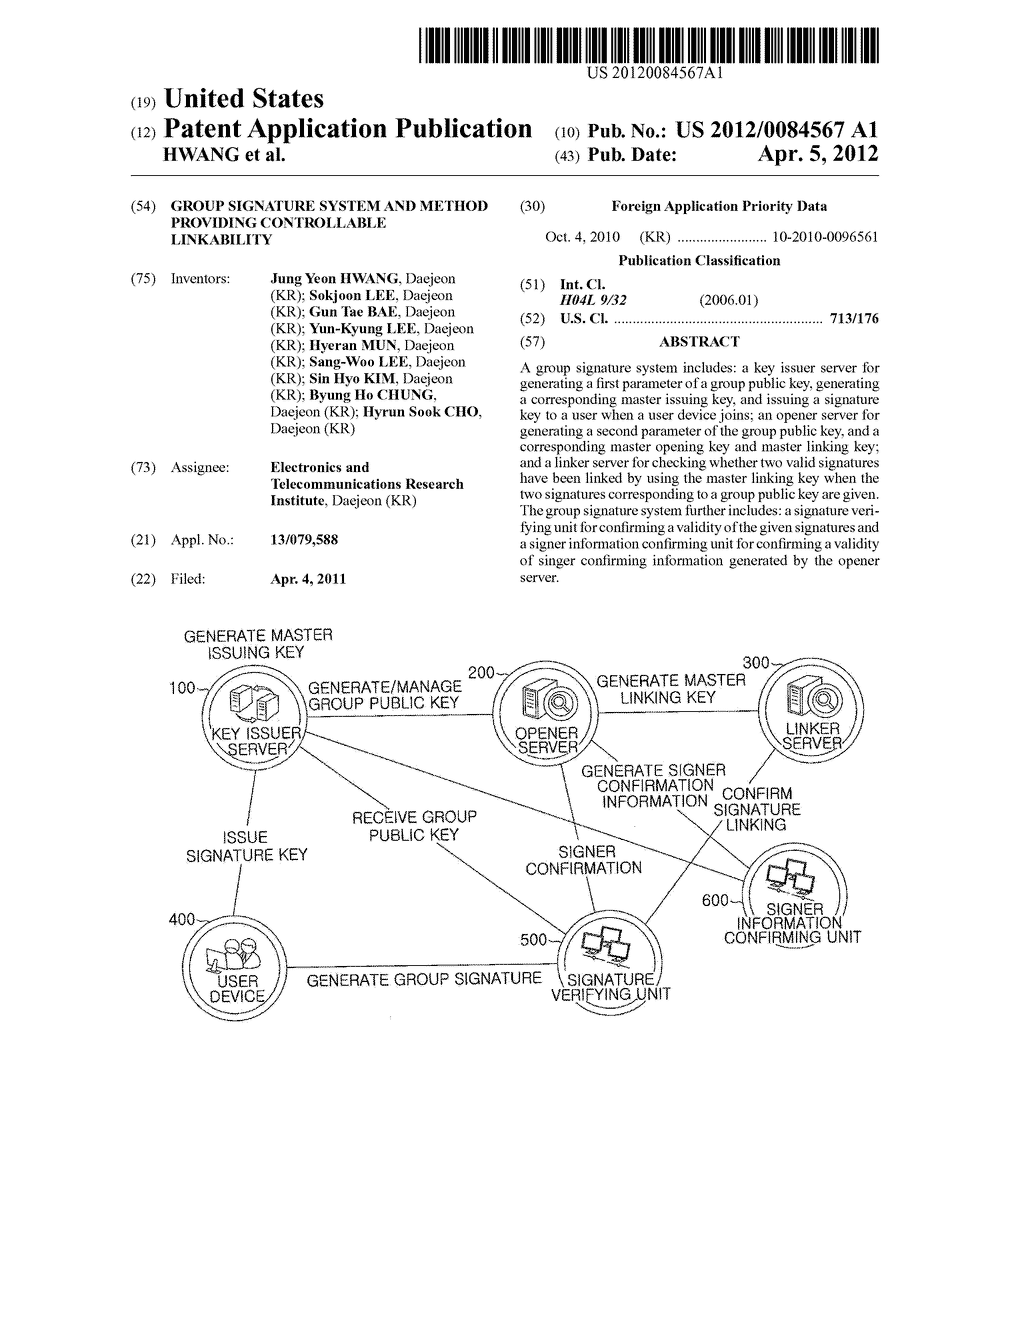 GROUP SIGNATURE SYSTEM AND METHOD PROVIDING CONTROLLABLE LINKABILITY - diagram, schematic, and image 01